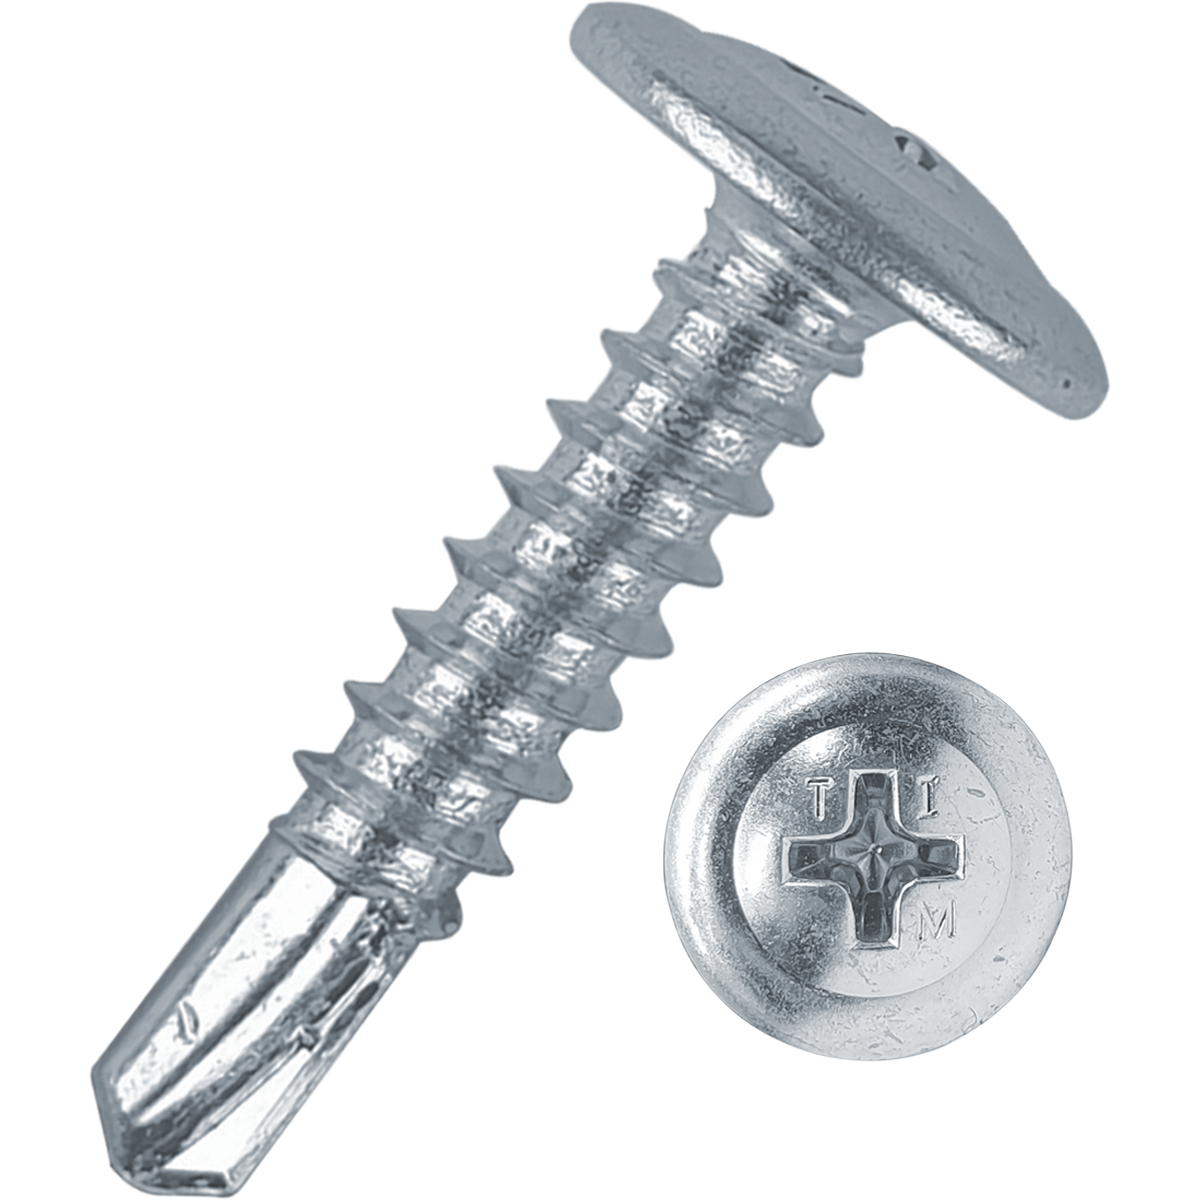 Wafer head self drilling screws with a drill bit like tip designed to penetrate the materials surface 